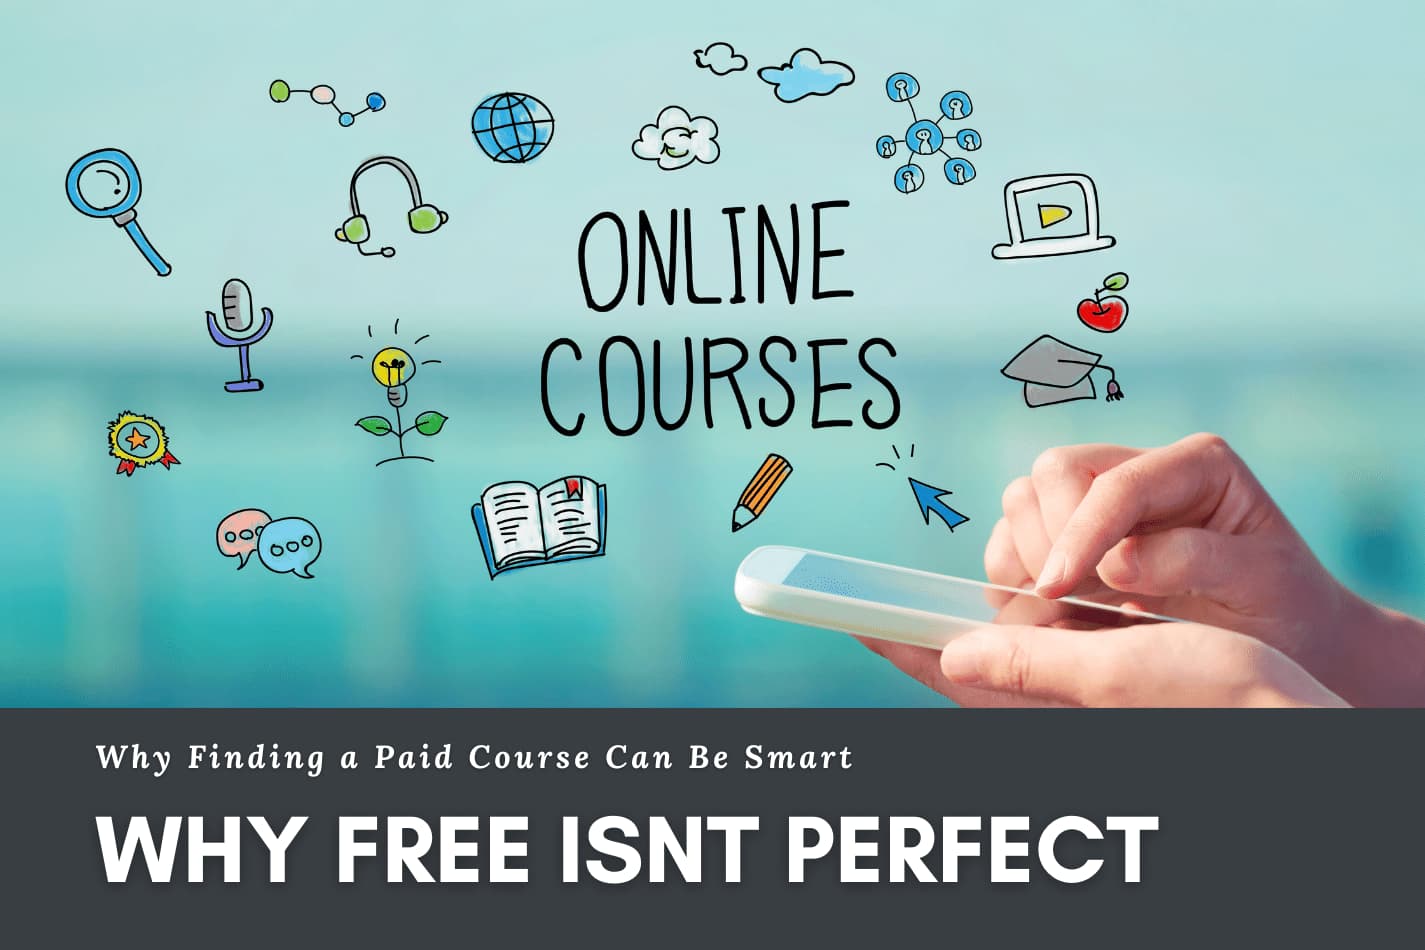 eLearning: Are Online Blogging Courses Worth the Investment?